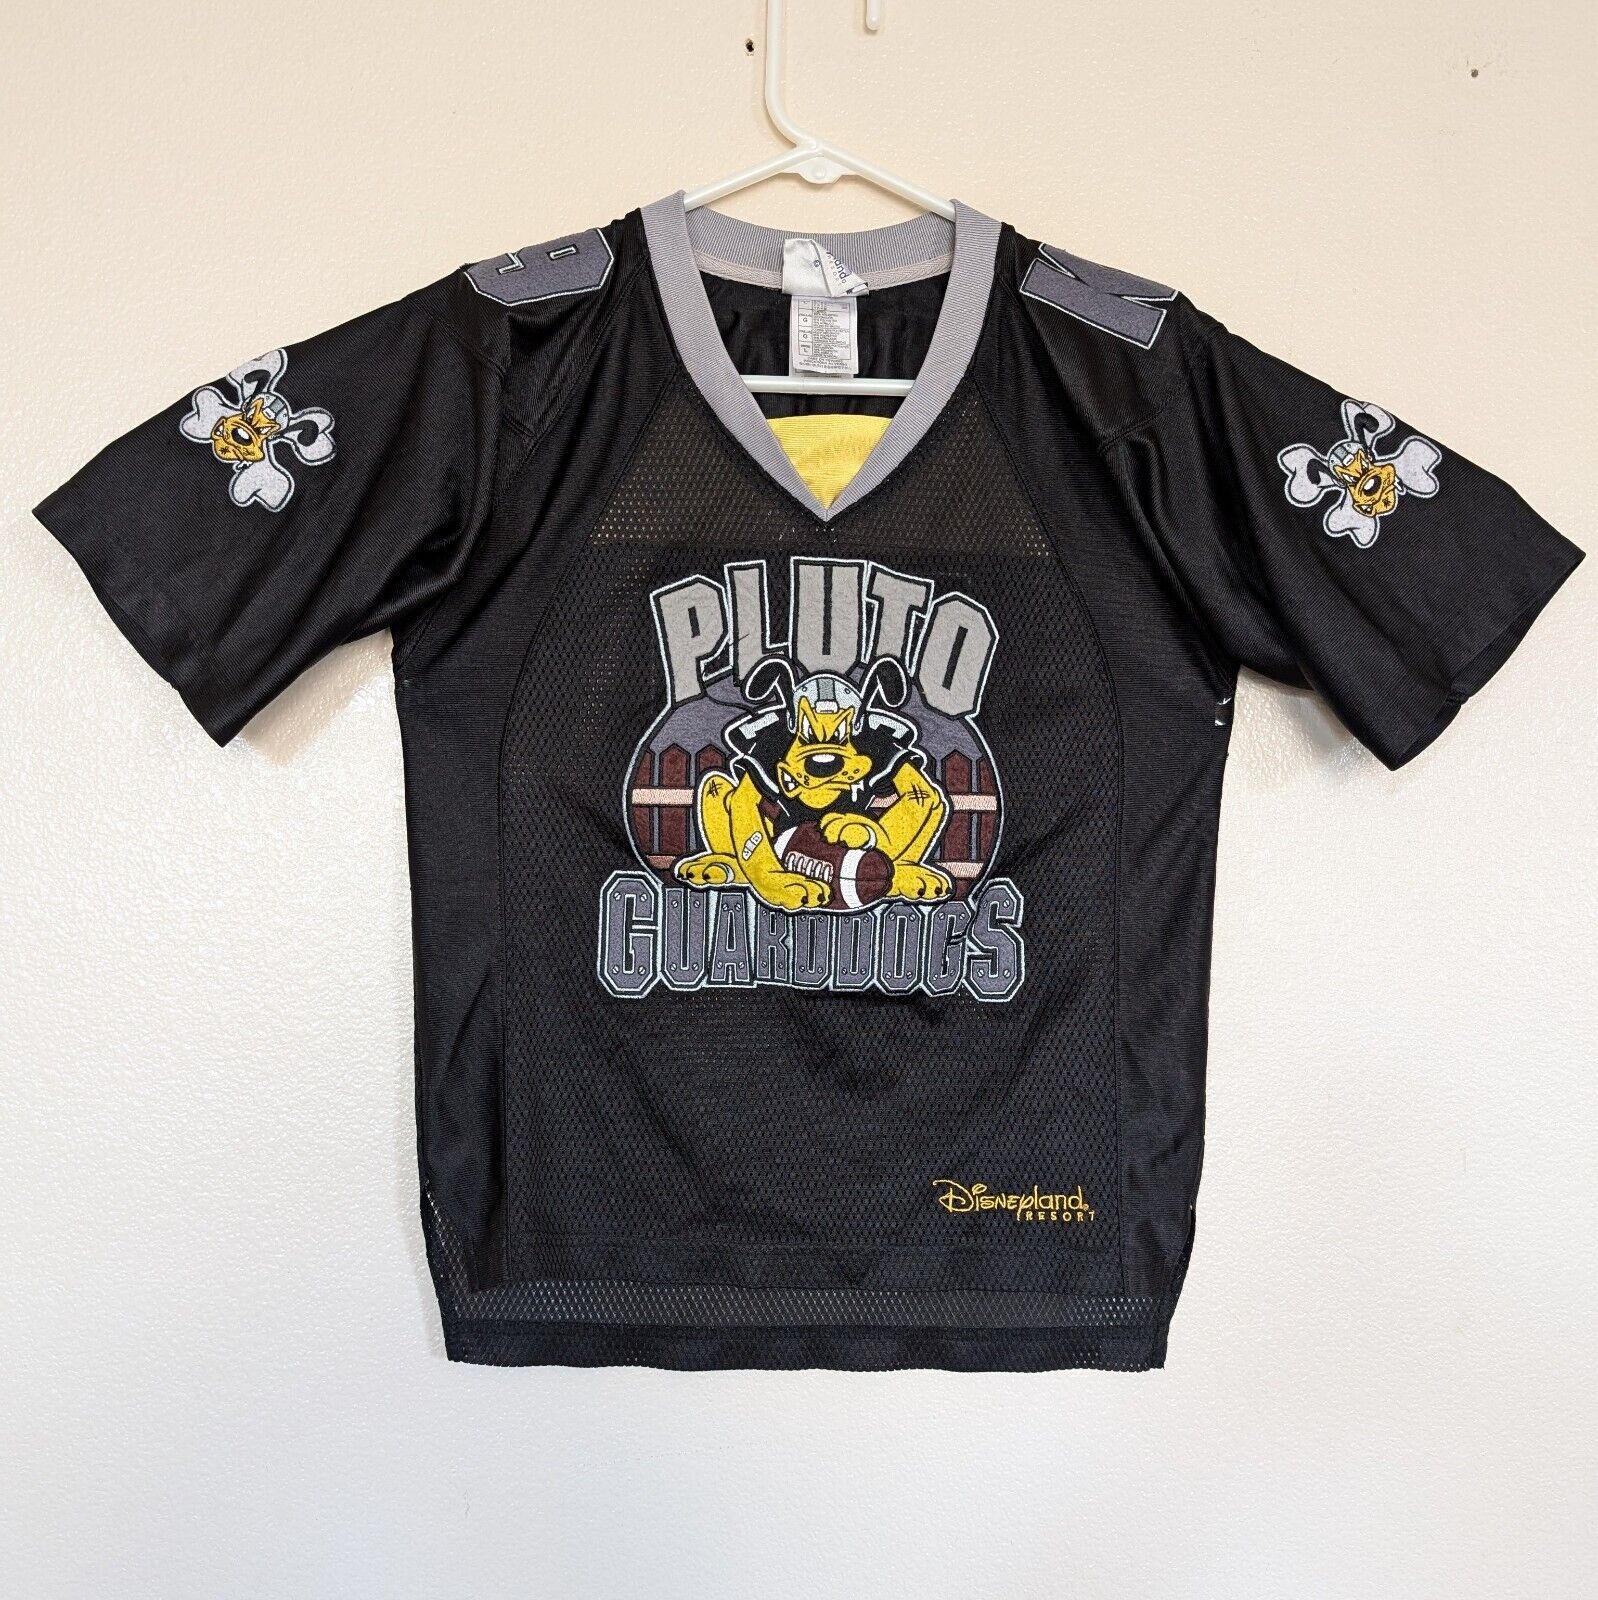 Pluto Guard Dogs Football Jersey Youth Large K9 Disneyland Resort Exclusive